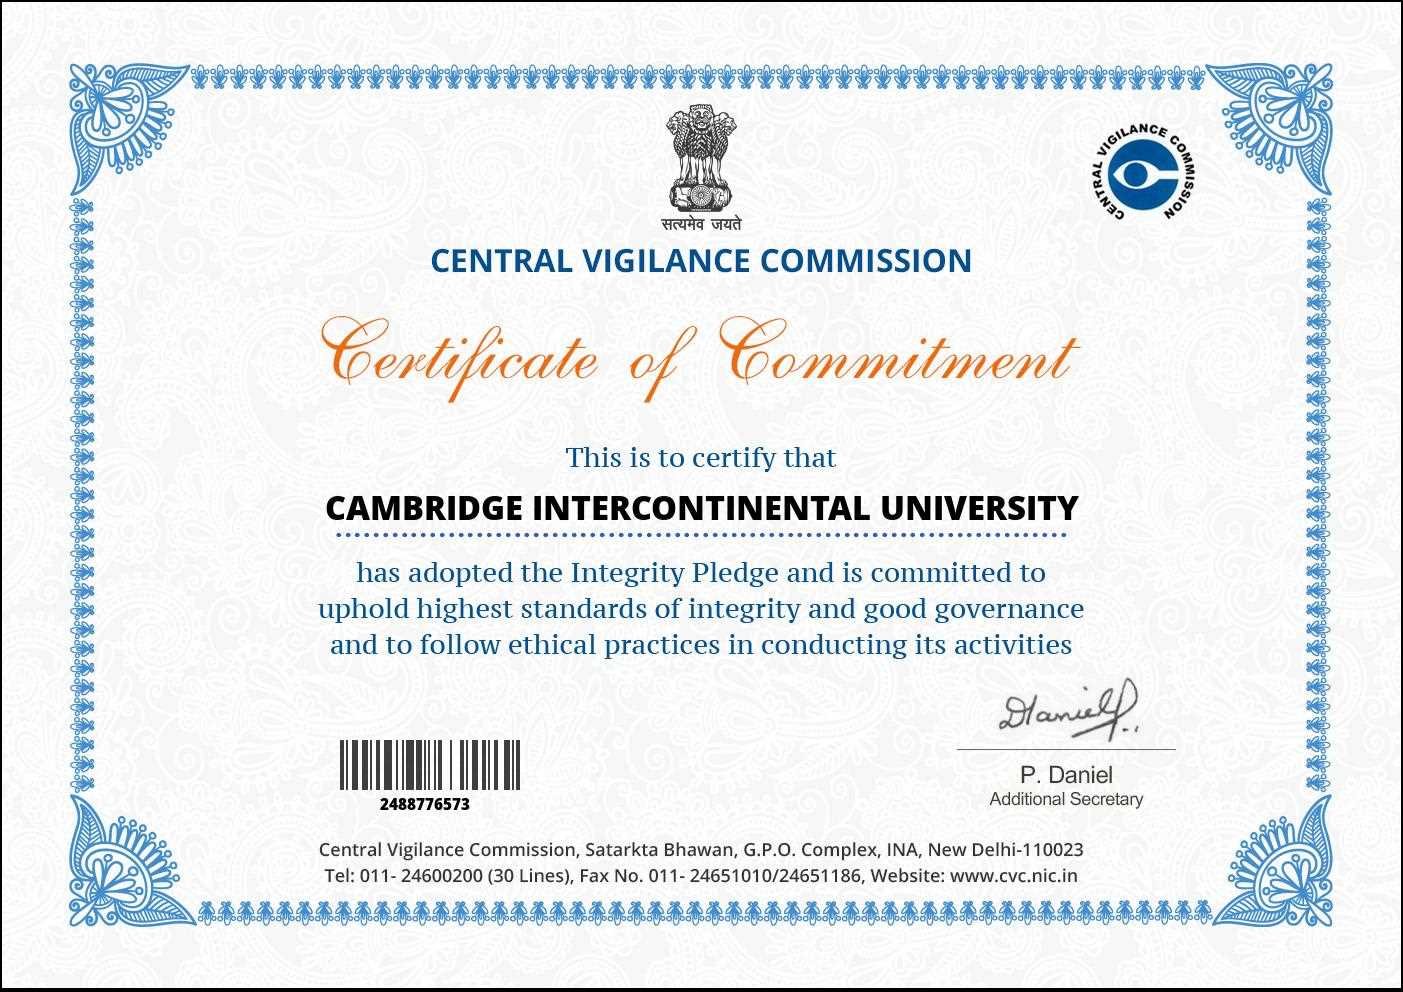 Government Recognition of Cambridge Intercontinental University